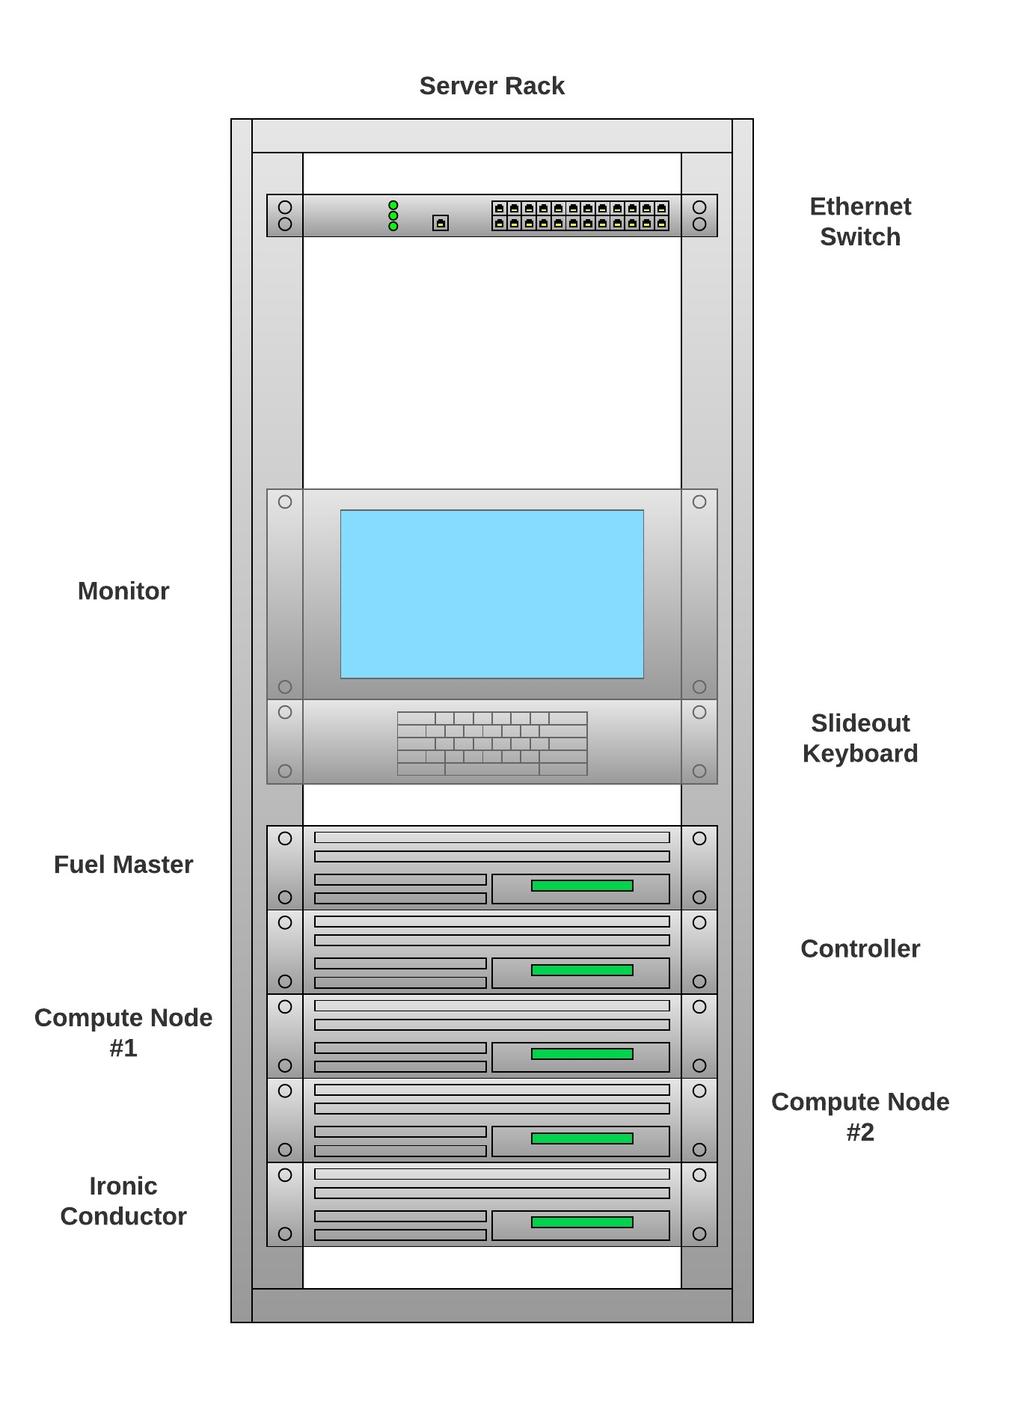 Chapter 4 System Description 4.1 Hardware Diagram 4.1 represents the system on which we take our measurements. The physical servers which were used were Hewlett Packard G6 servers.